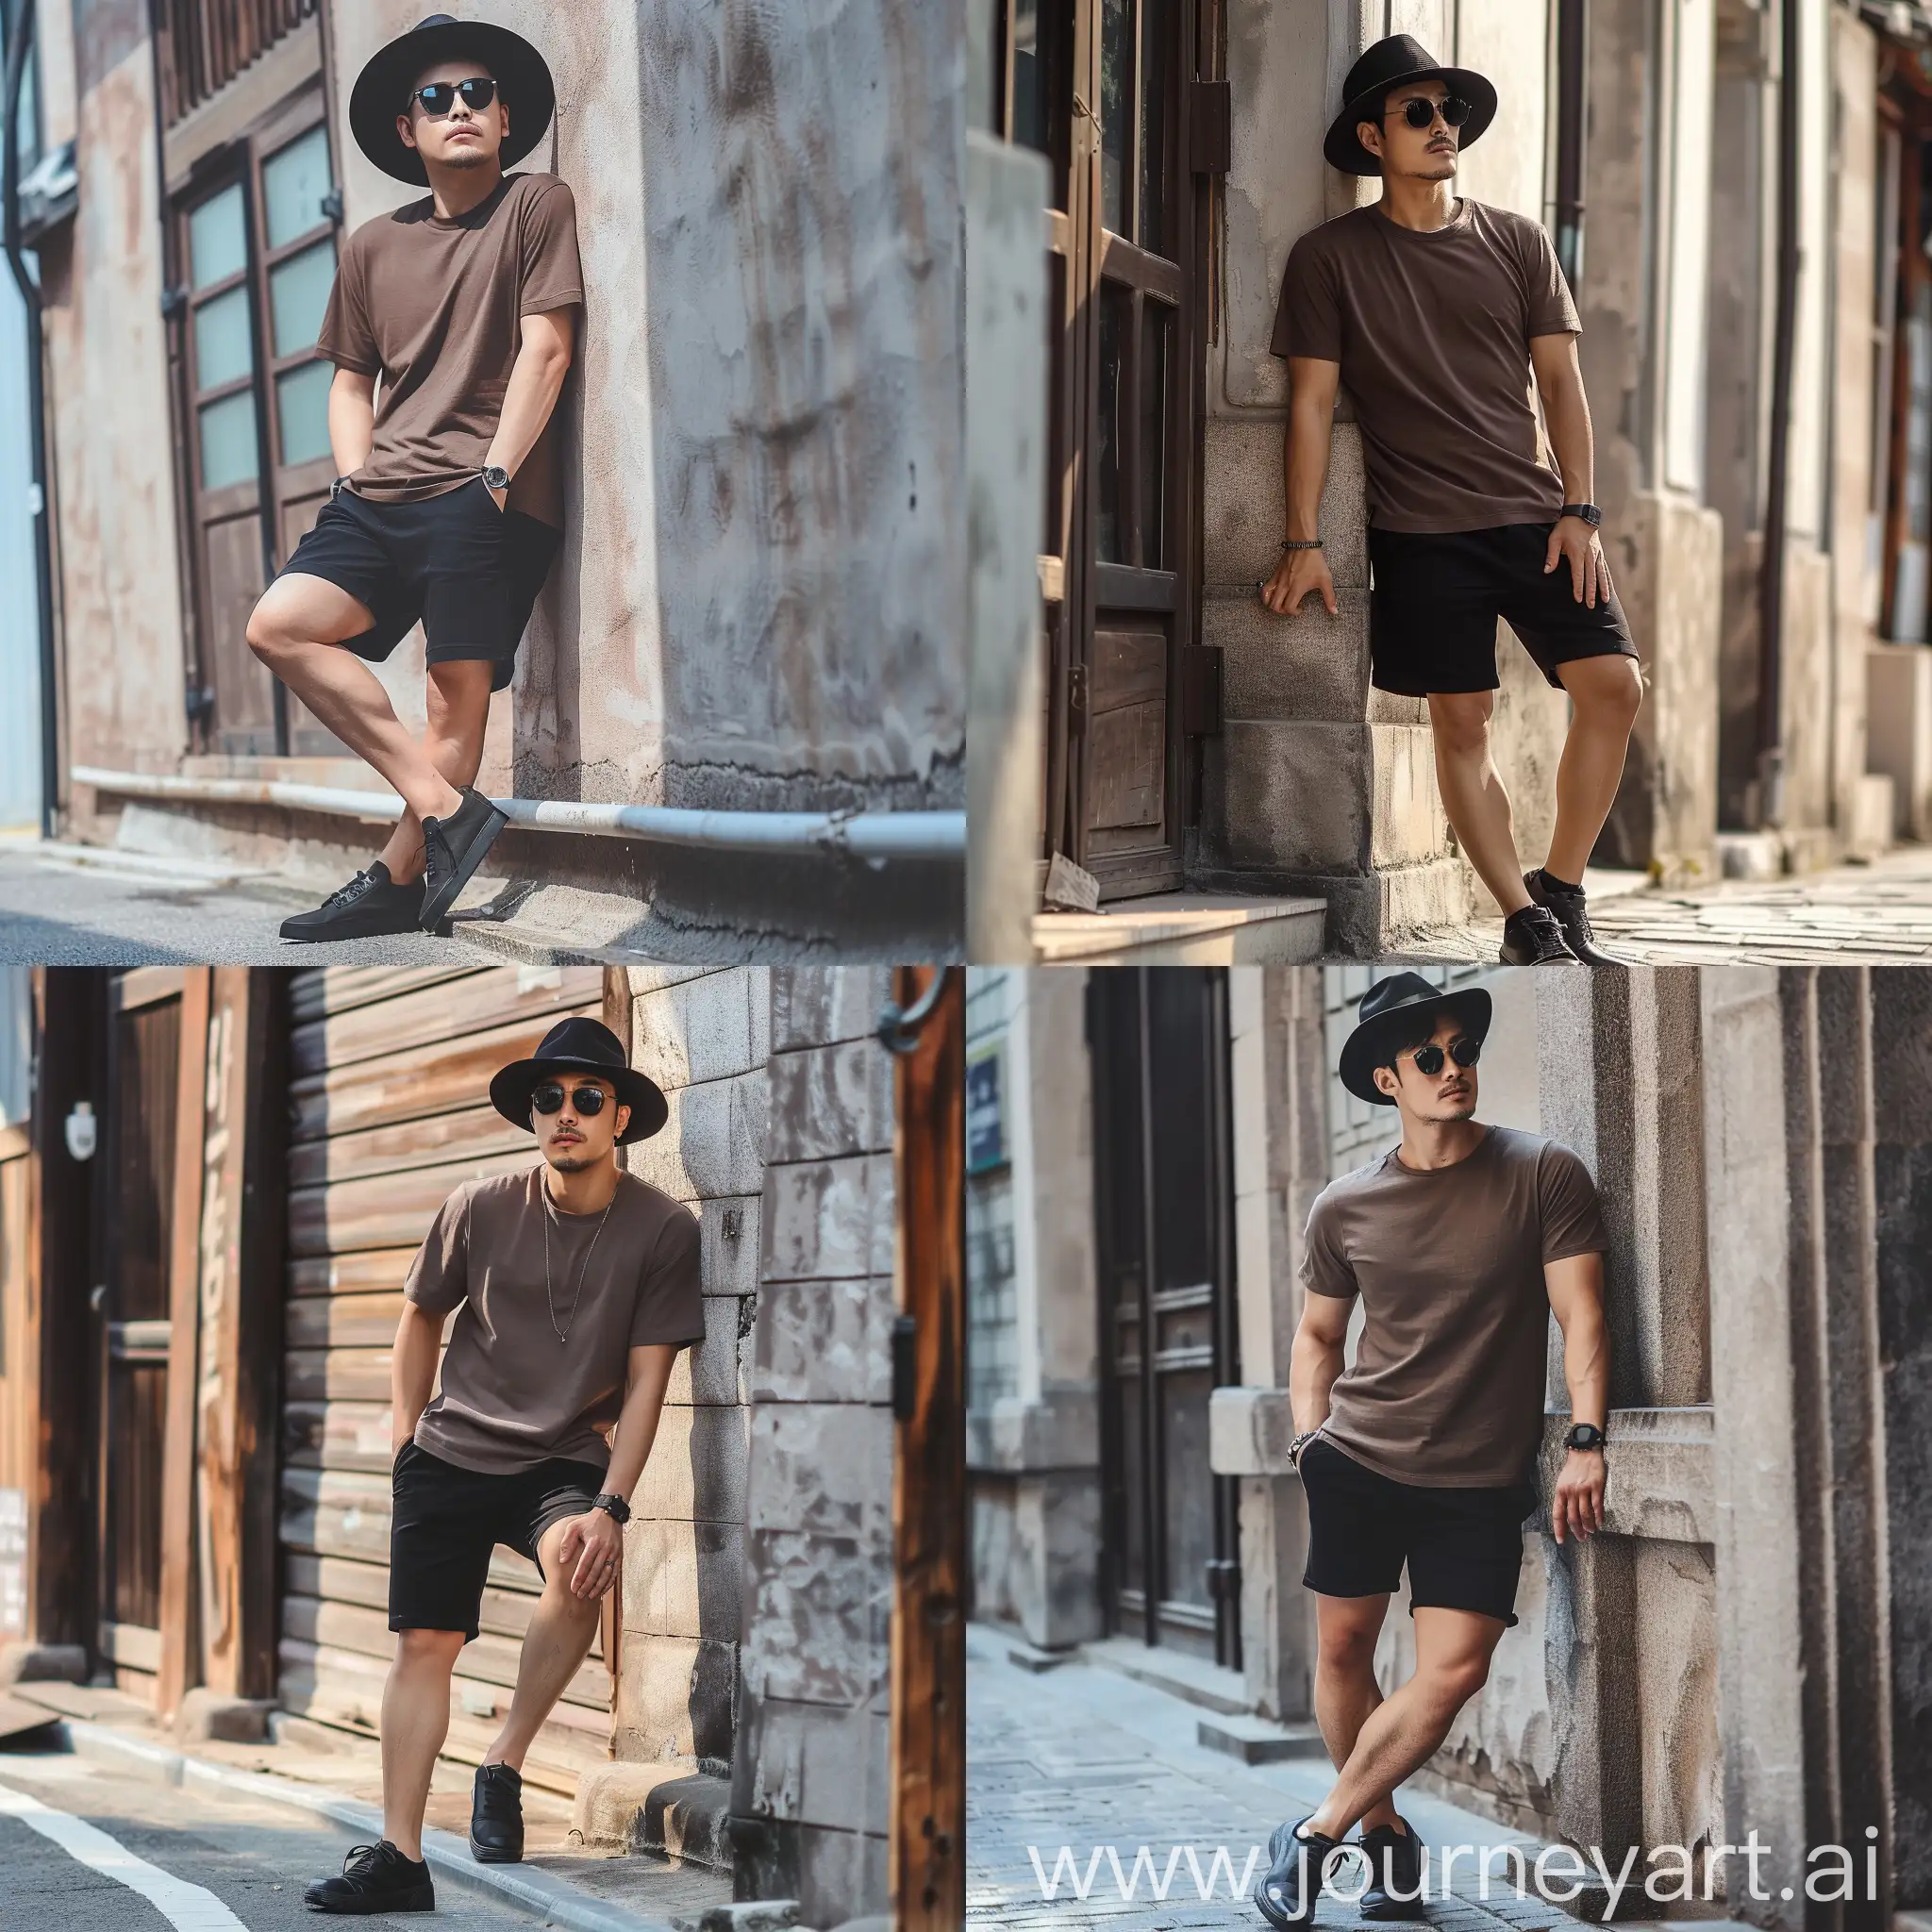 A 35-year-old handsome Korean man wearing a black hat, sunglasses, brown t-shirt, black shorts, and black shoes, leaning against a wall with an expression of looking to the left, with a background of a building wall, realistic HD